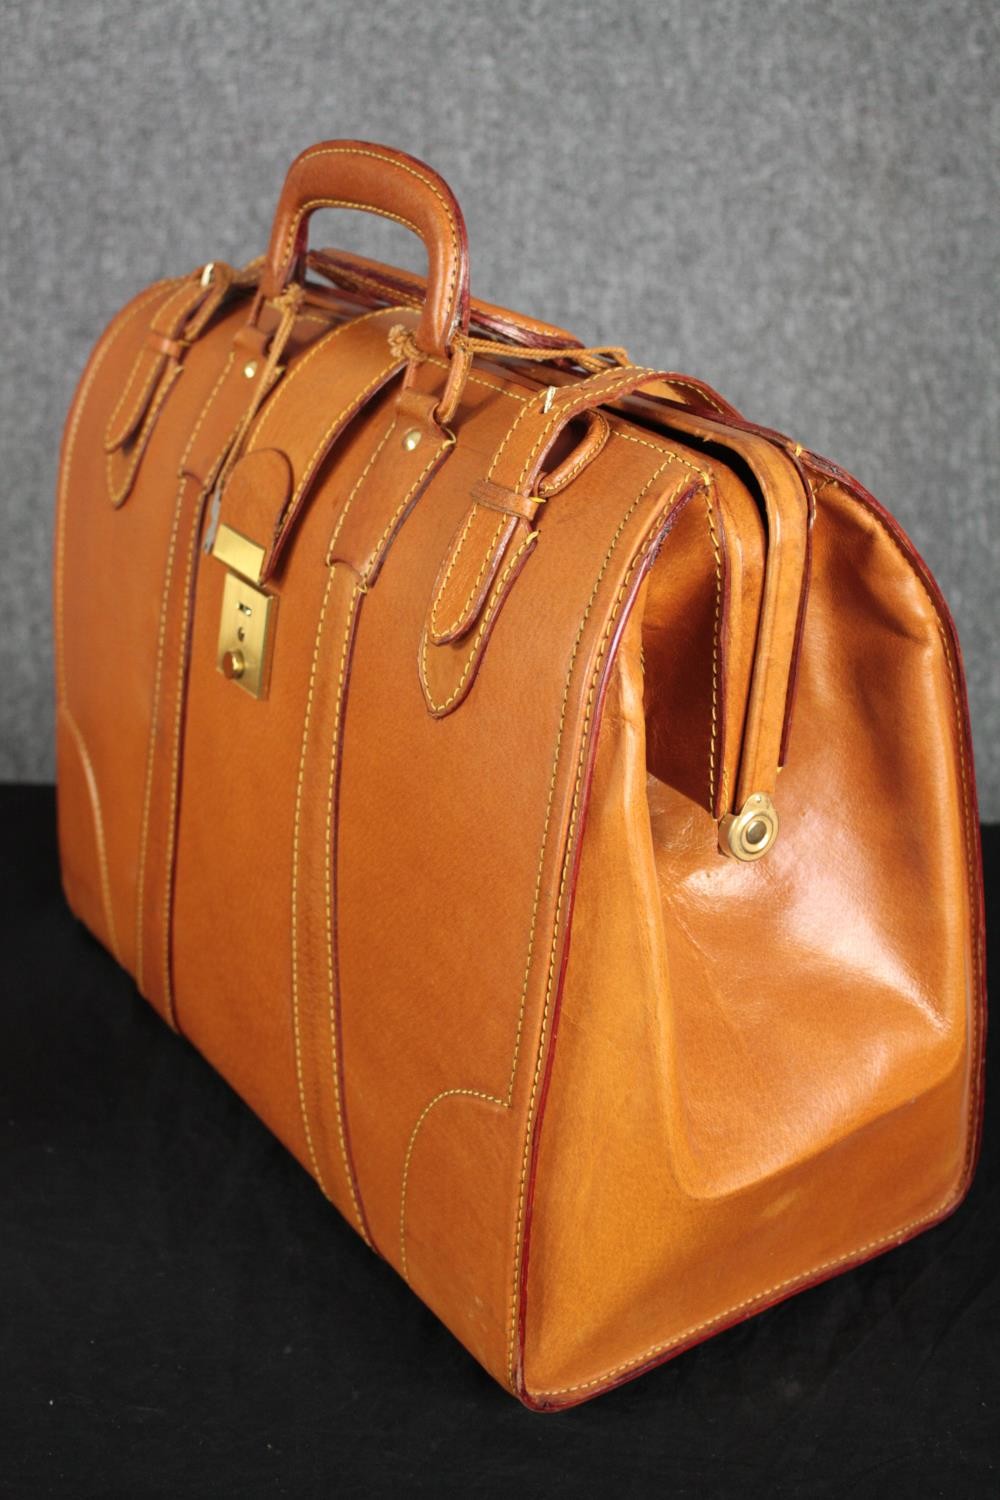 Two pairs of bespoke tan leather Gladstone bag style travel luggage. One larger and one smaller. - Image 3 of 7